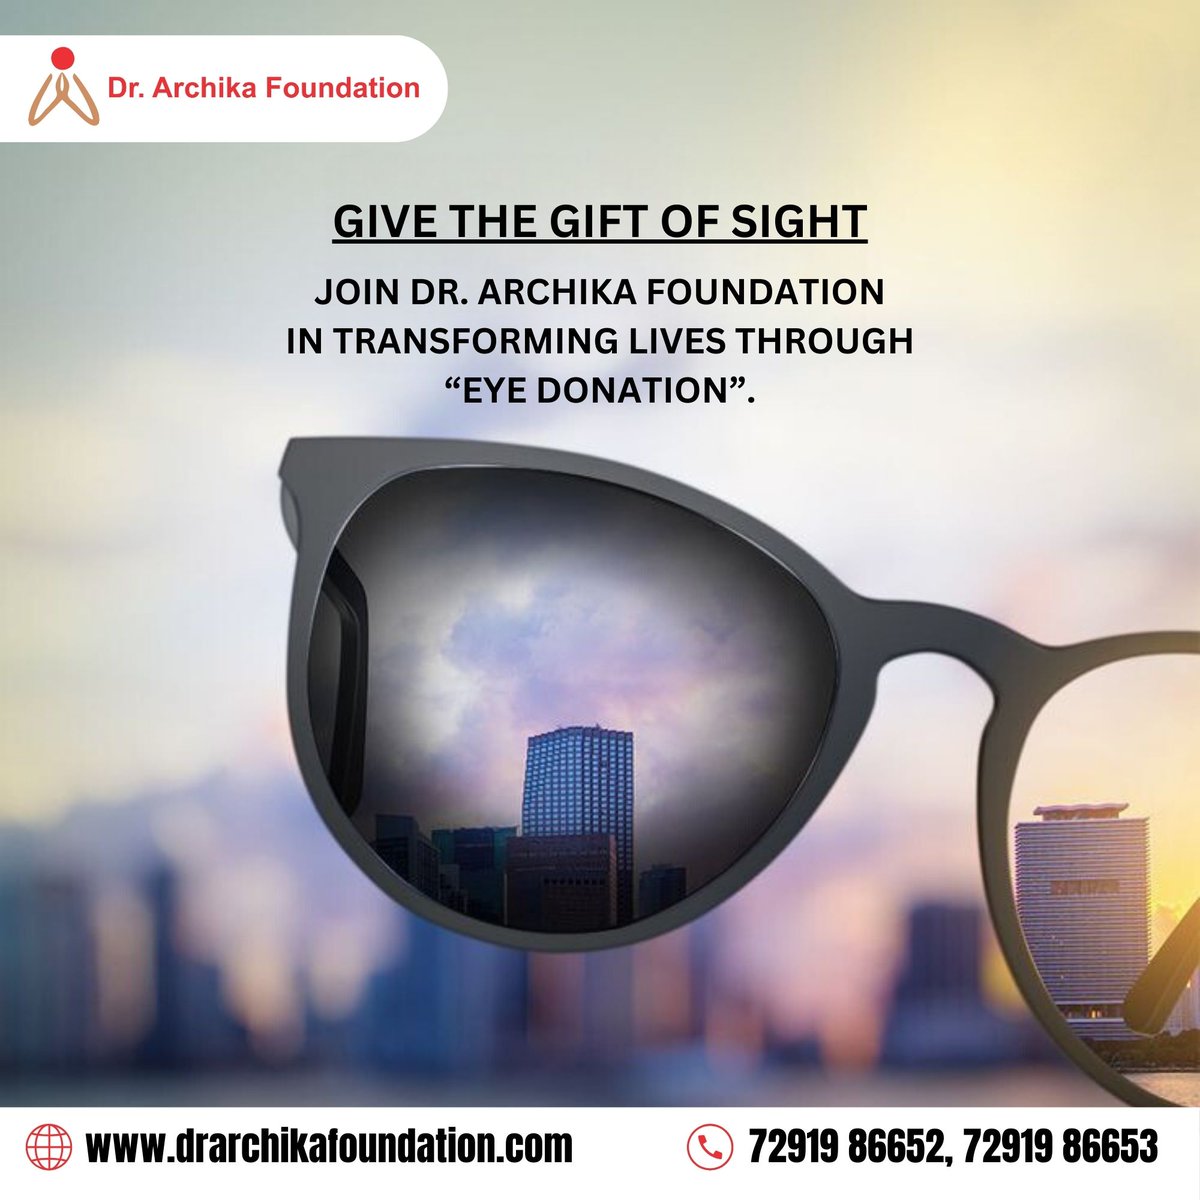 Give the Gift of Sight: Join Dr. Archika Foundation in Transforming Lives Through Eye Donation.
.
Donate now: drarchikafoundation.com/donate.php
.
#drarchikafoundation #drarchikadidi #youth #ngo #child #motivation #inspiration #womeninleadership #empowerment #womenchangemakers #girlpower